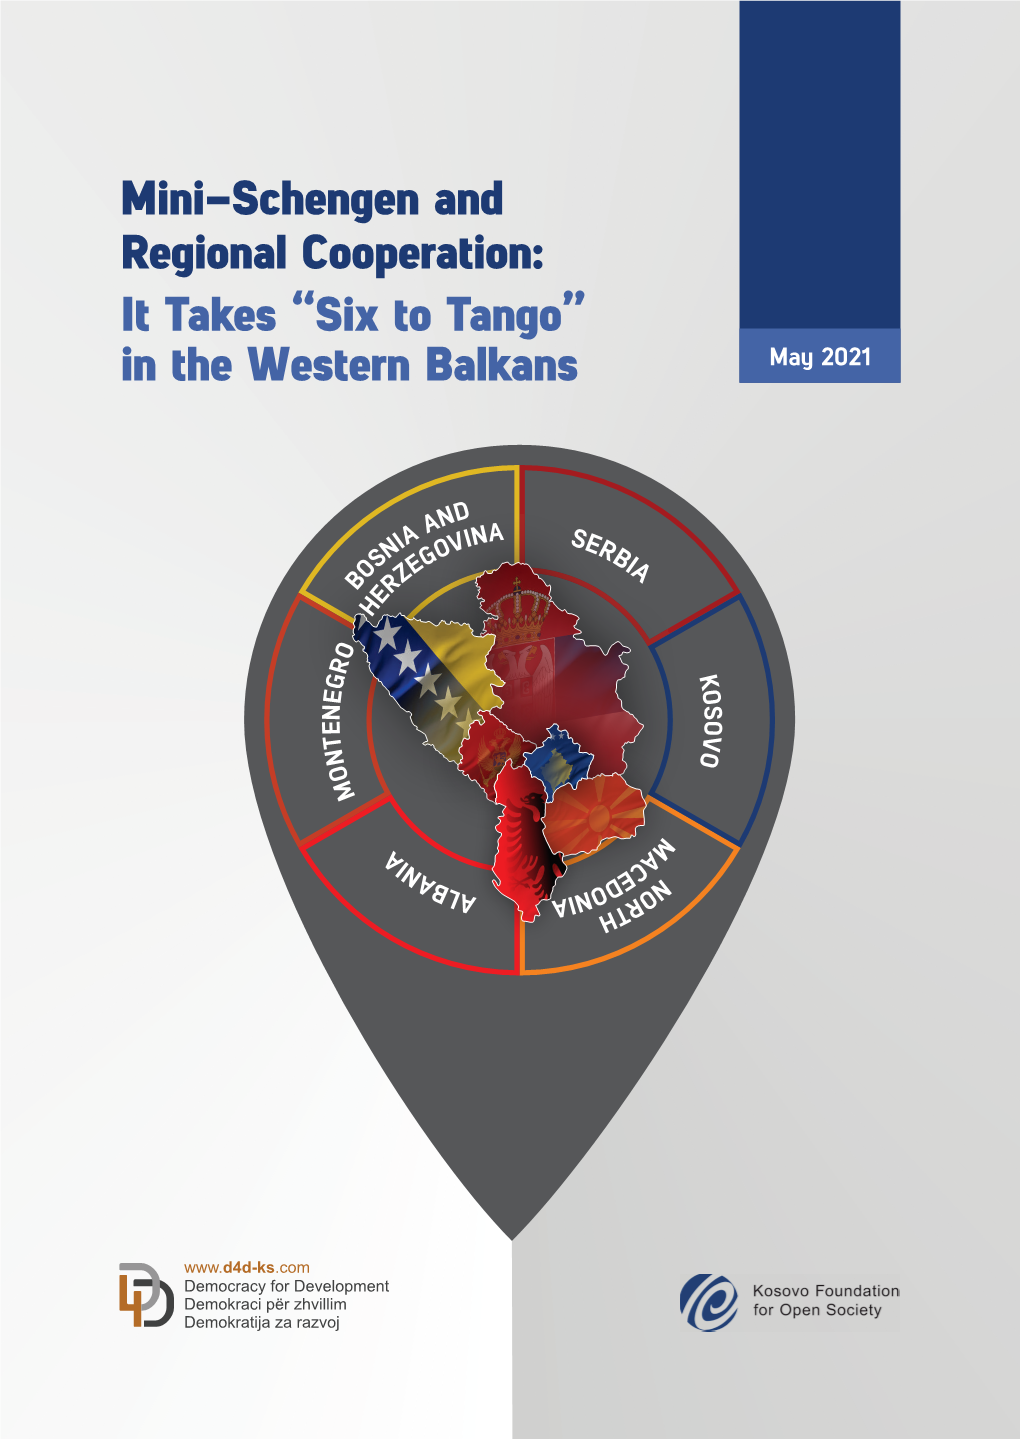 Mini-Schengen and Regional Cooperation: It Takes “Six to Tango” in the Western Balkans May 2021